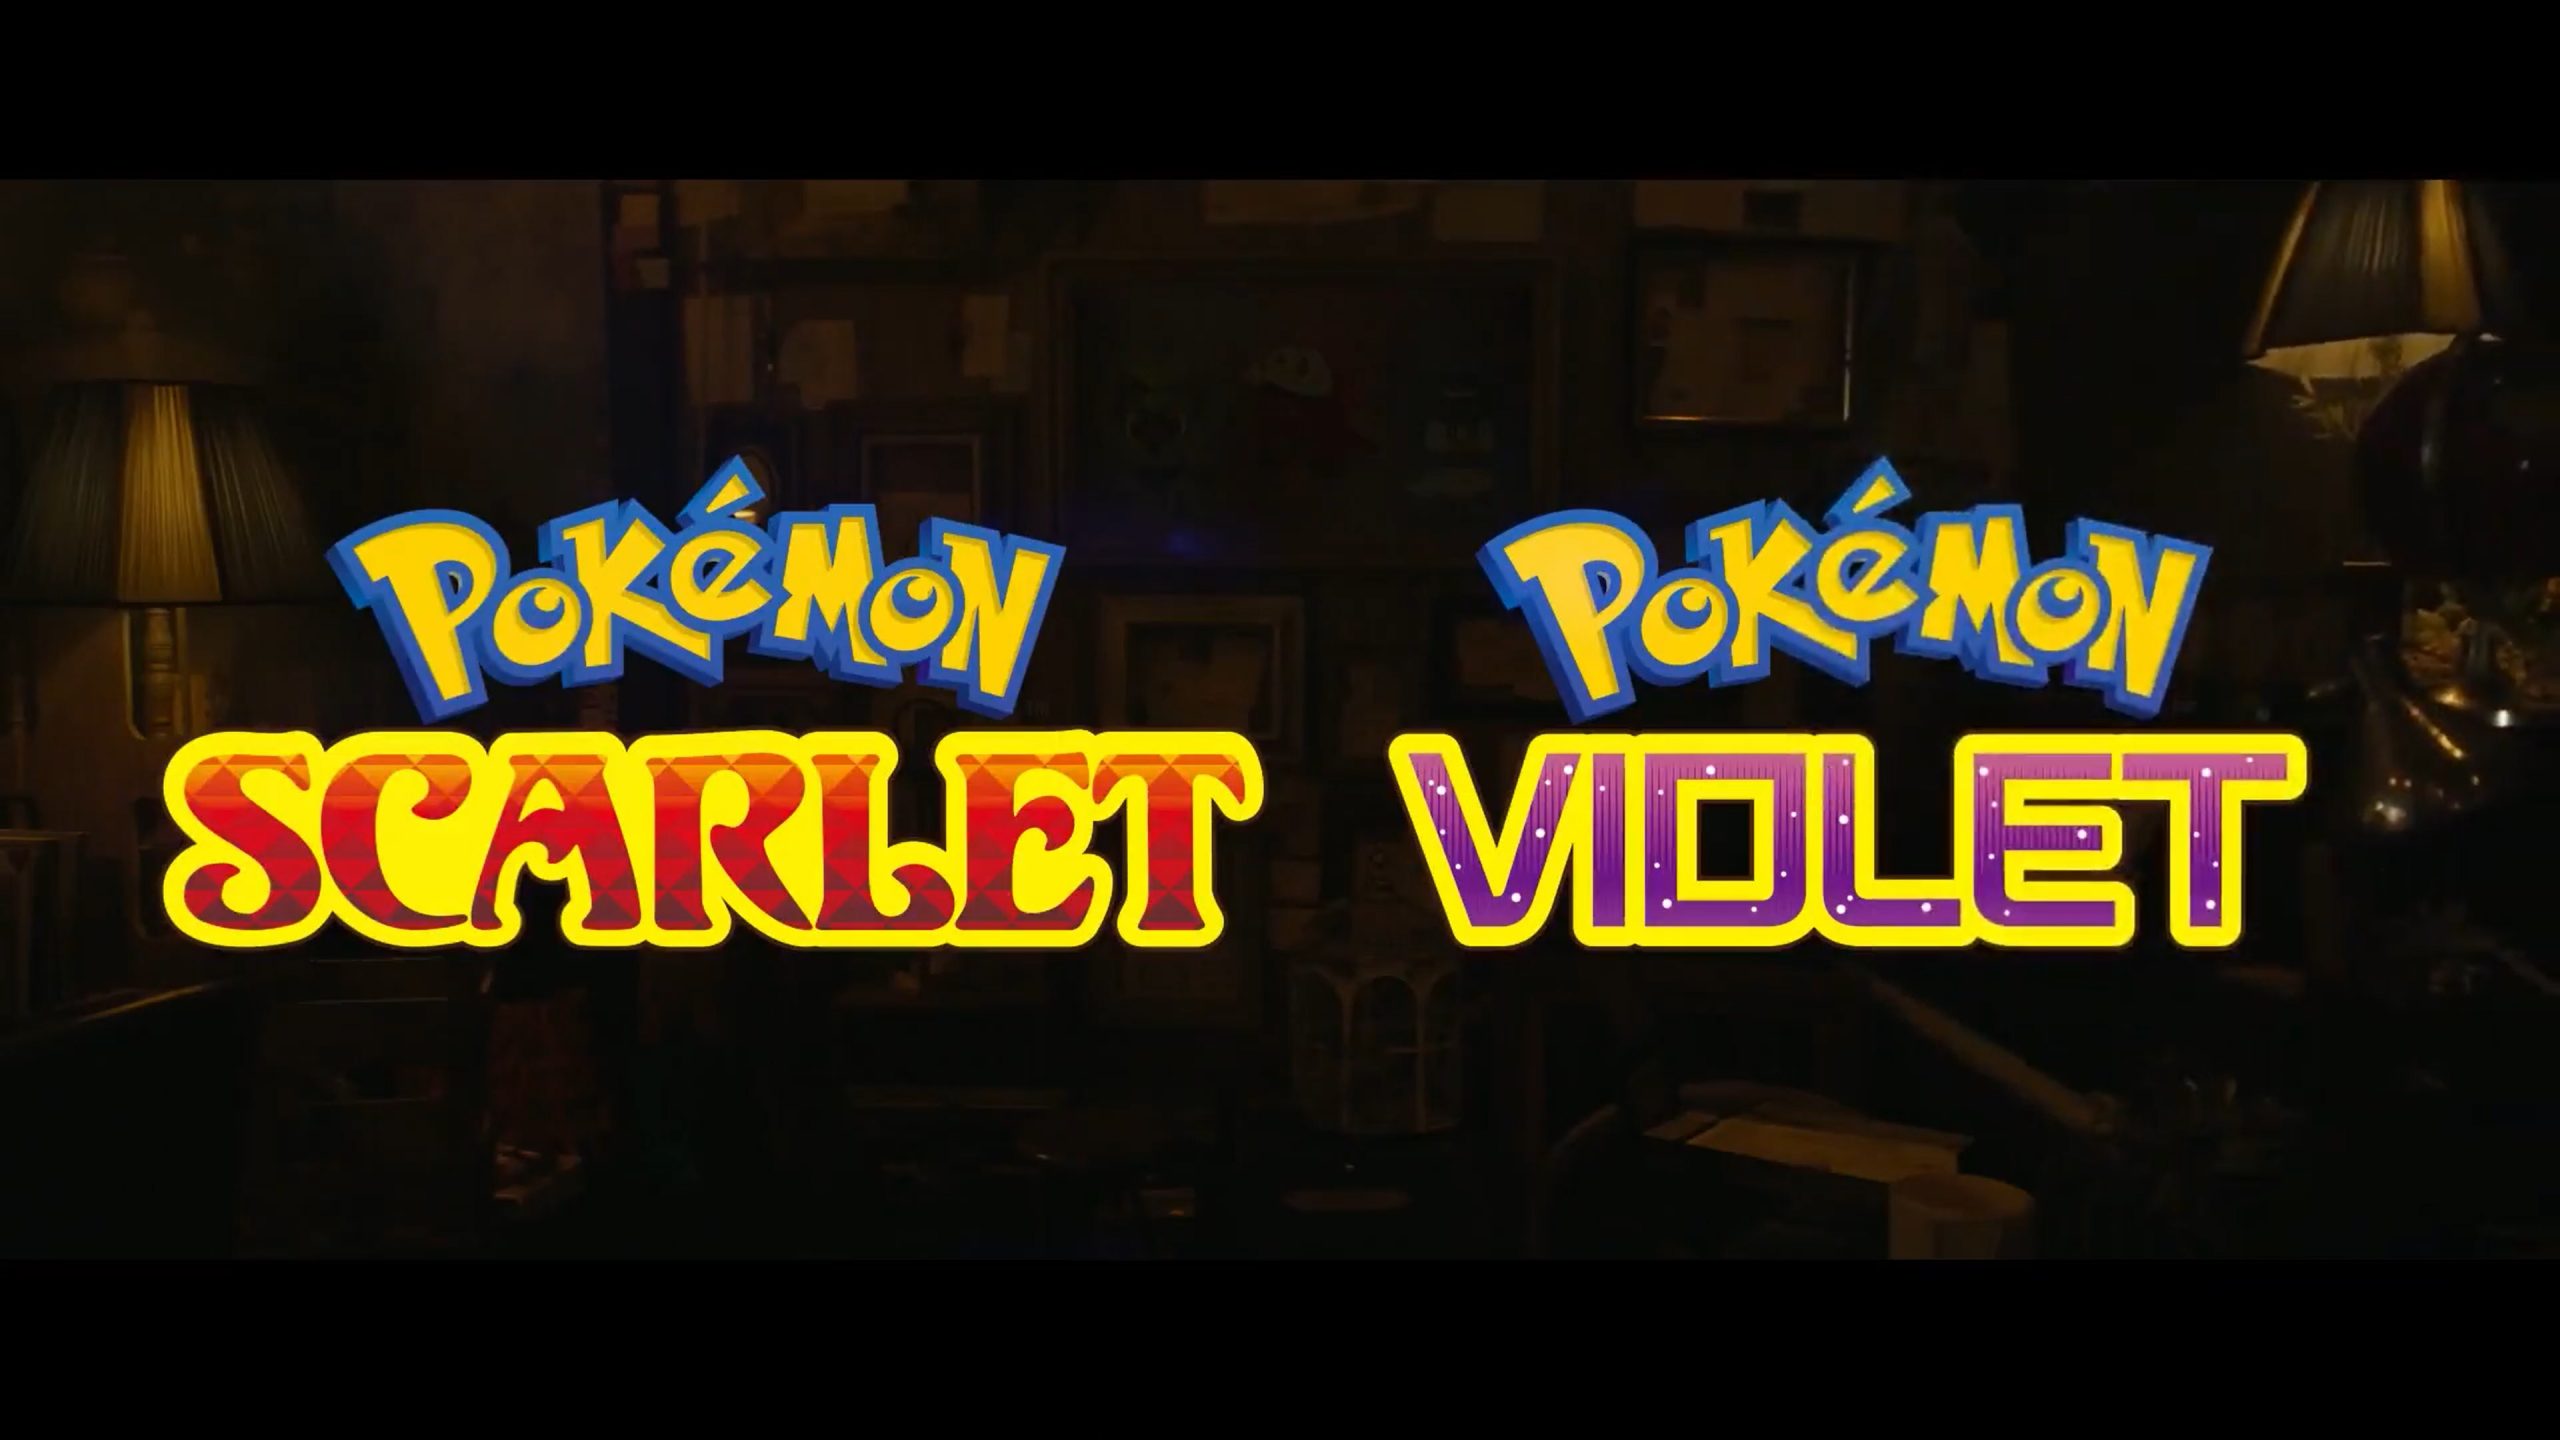 You are currently viewing Pokemon Scarlet и Pokemon Violet анонсированы для Switch!